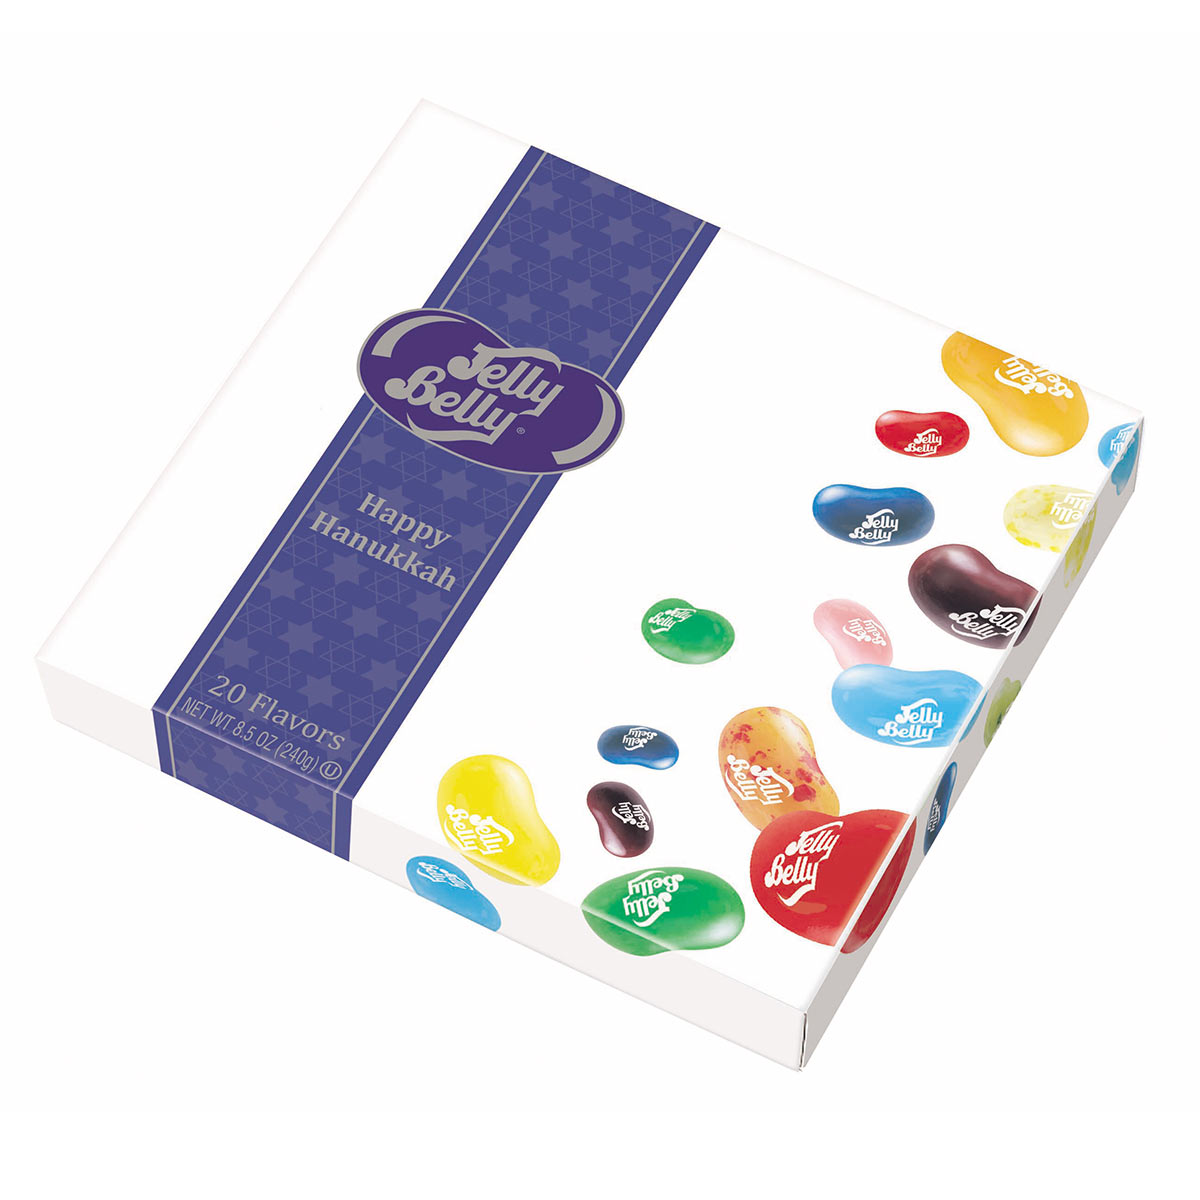 Jelly Belly 20-Flavor Happy Hanukkah Gift Box. Assorted beans like Buttered Popcorn and Very Cherry. Great kosher gift box for Jelly Bean fans.